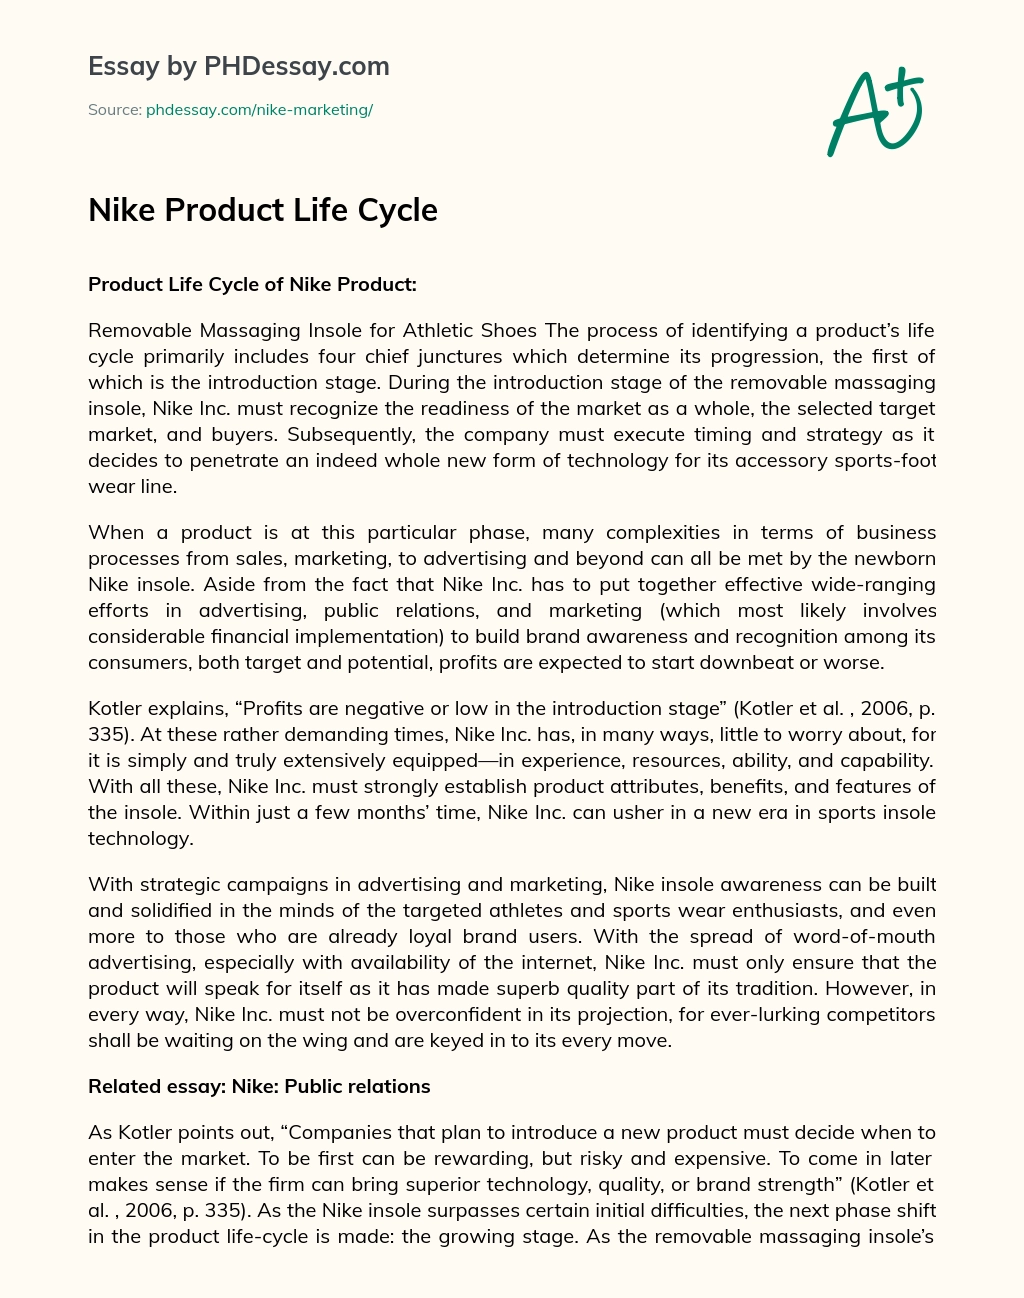 Nike Product Life Cycle essay